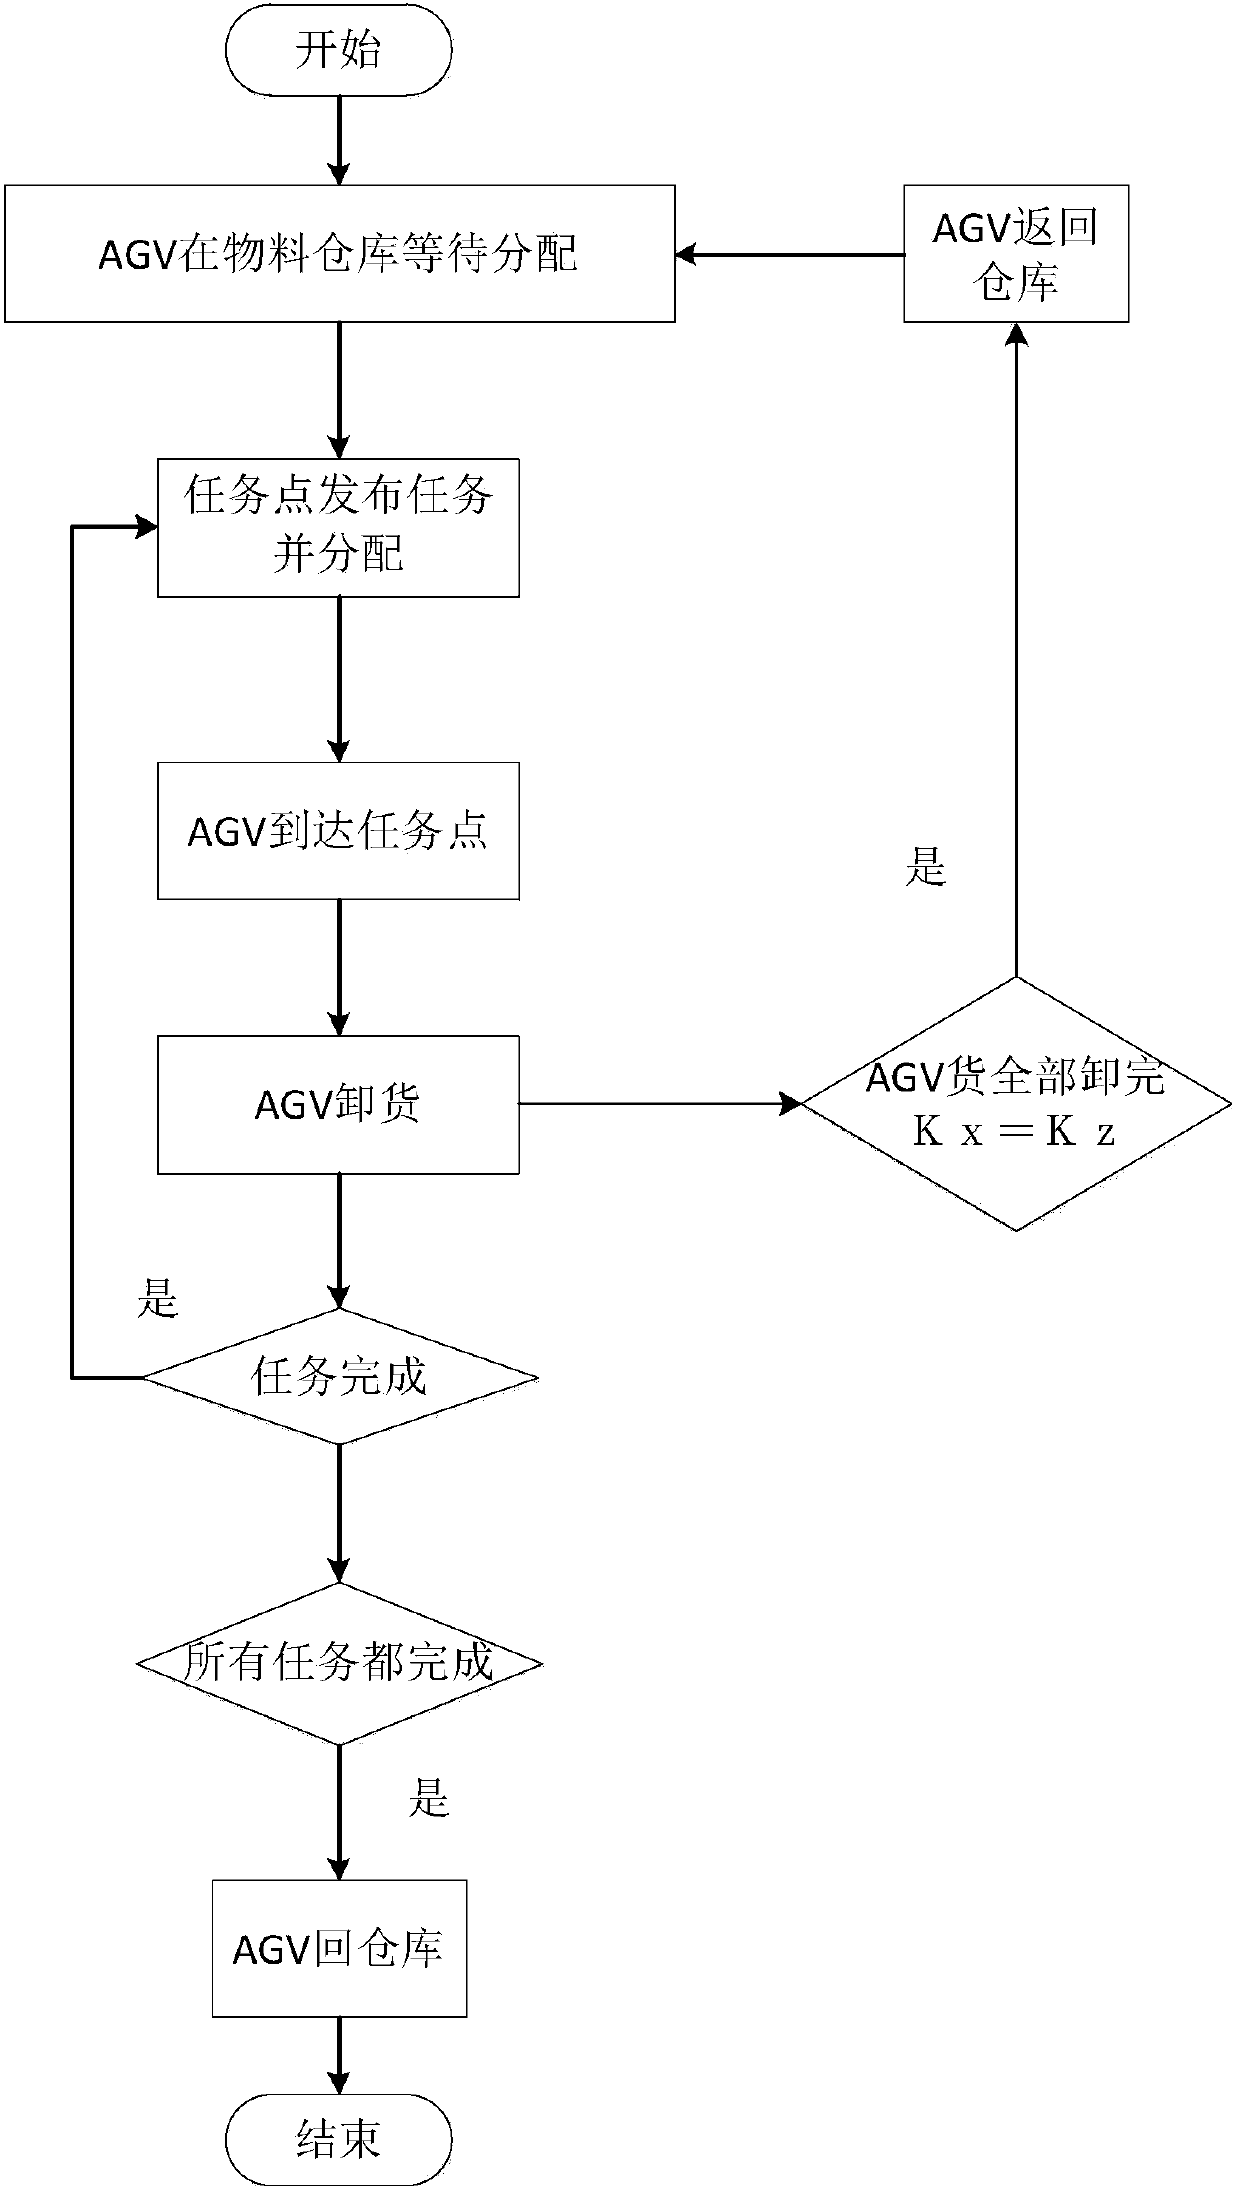 Multi-load AGV task assignment forming method for tobacco factory material transport